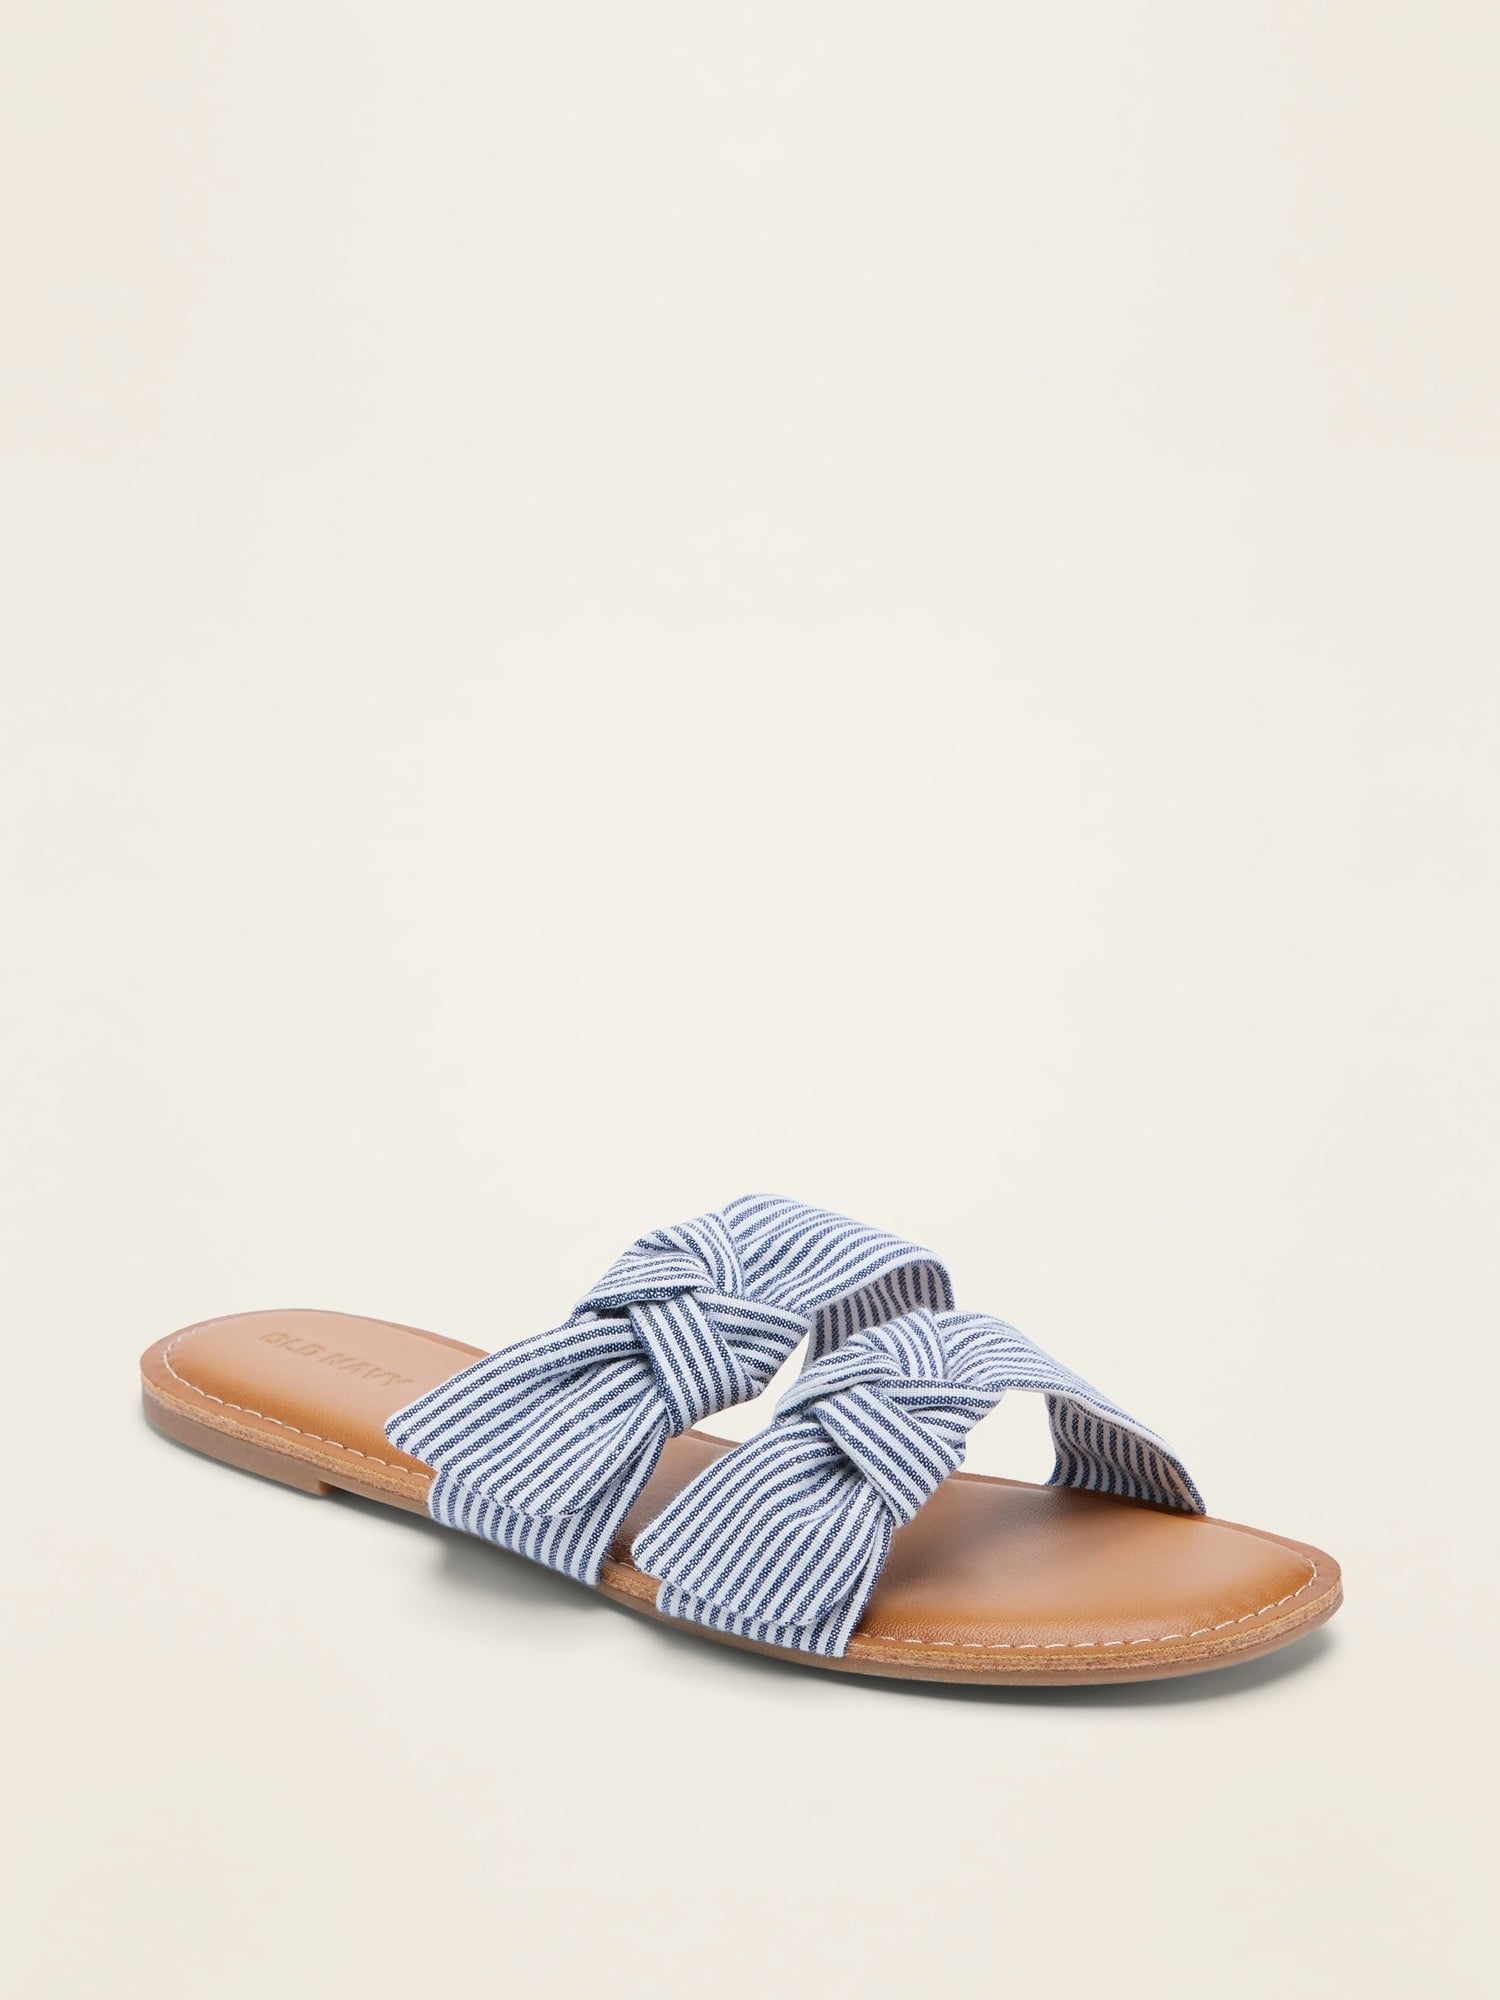 navy bow sandals